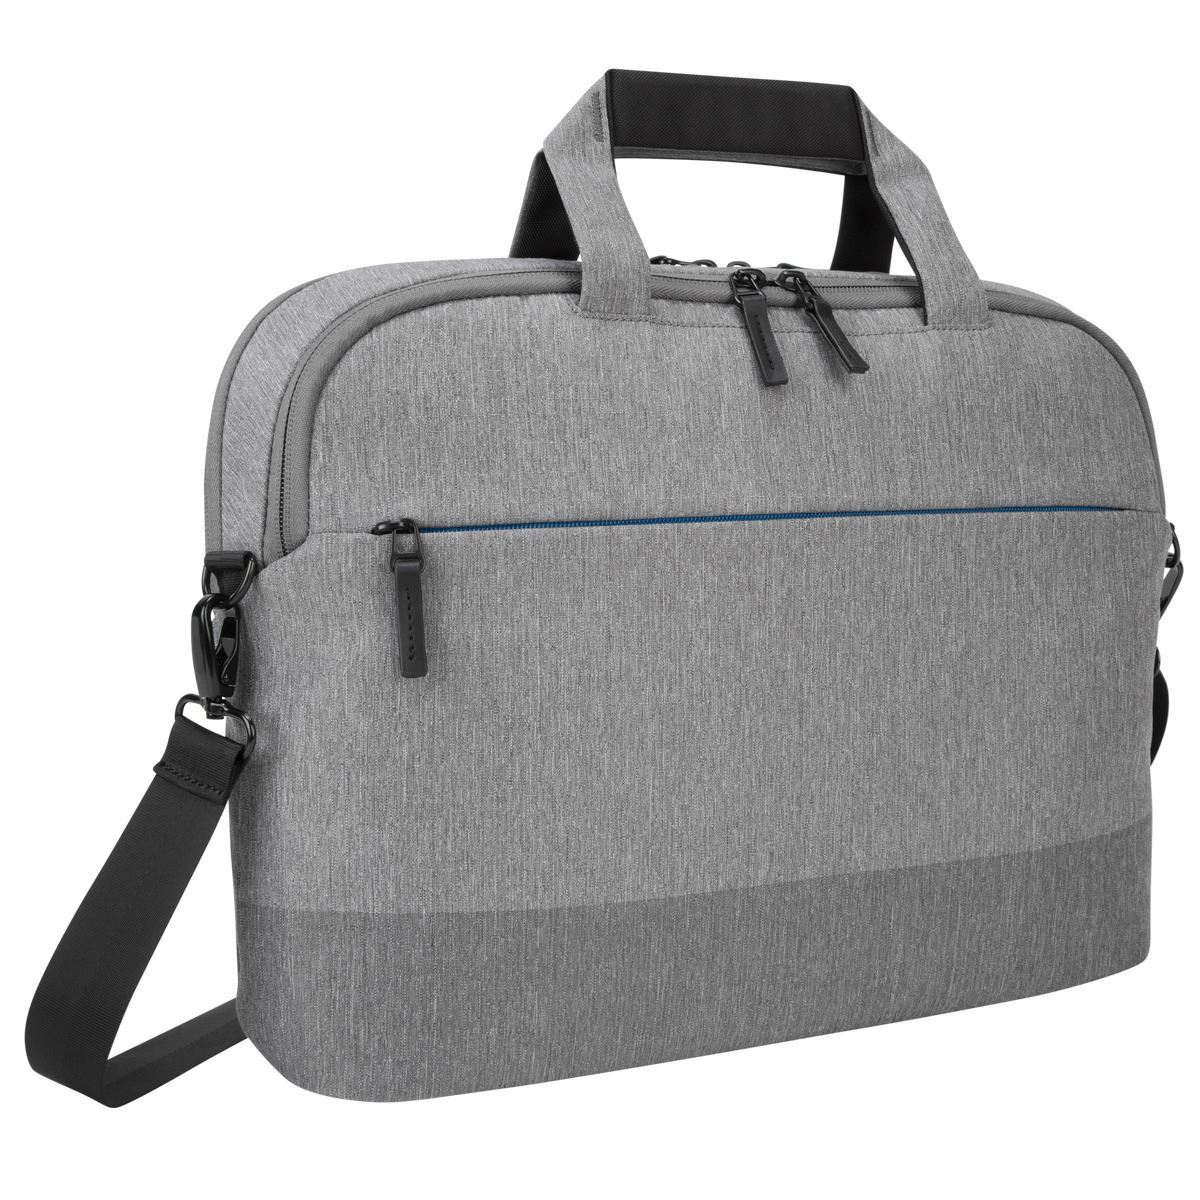 CityLite laptop bag best for work, commute or university, fits up to 15.6”  Laptop – Grey